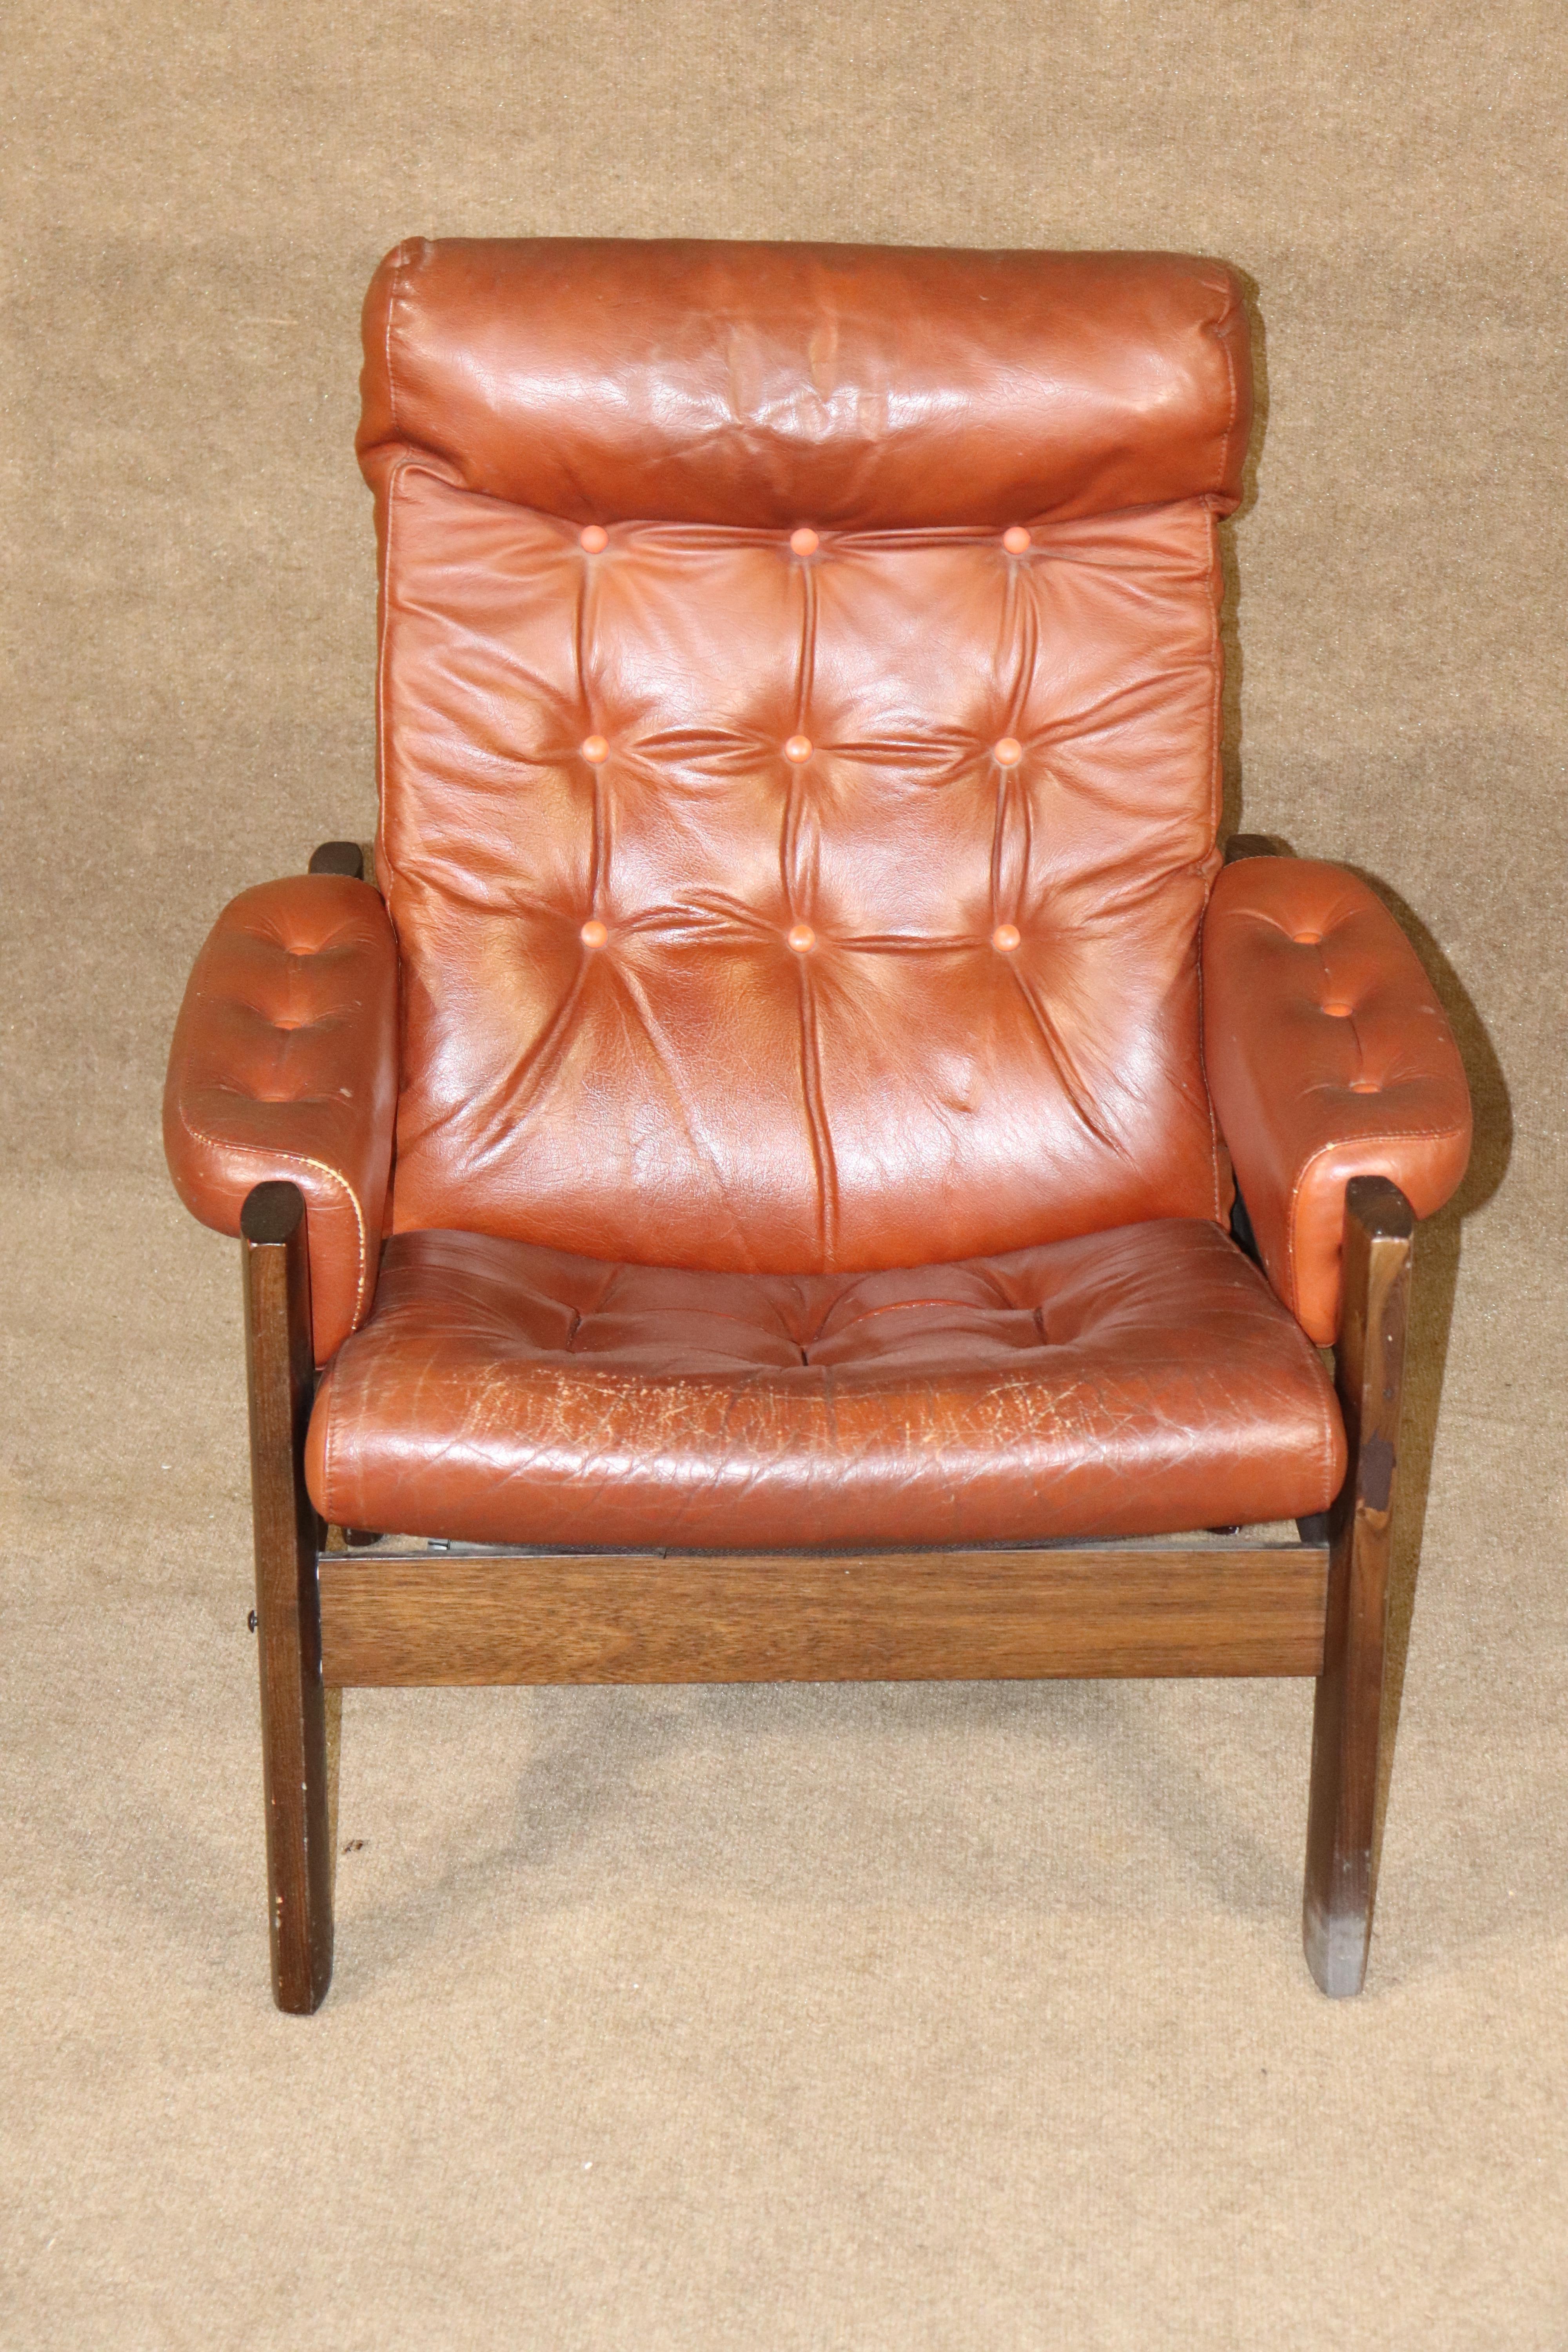 Vintage Mid-Century Modern lounge chair with matching ottoman. Leather seat with tufted design set on a strong wood frame.
Please confirm location NY or NJ.